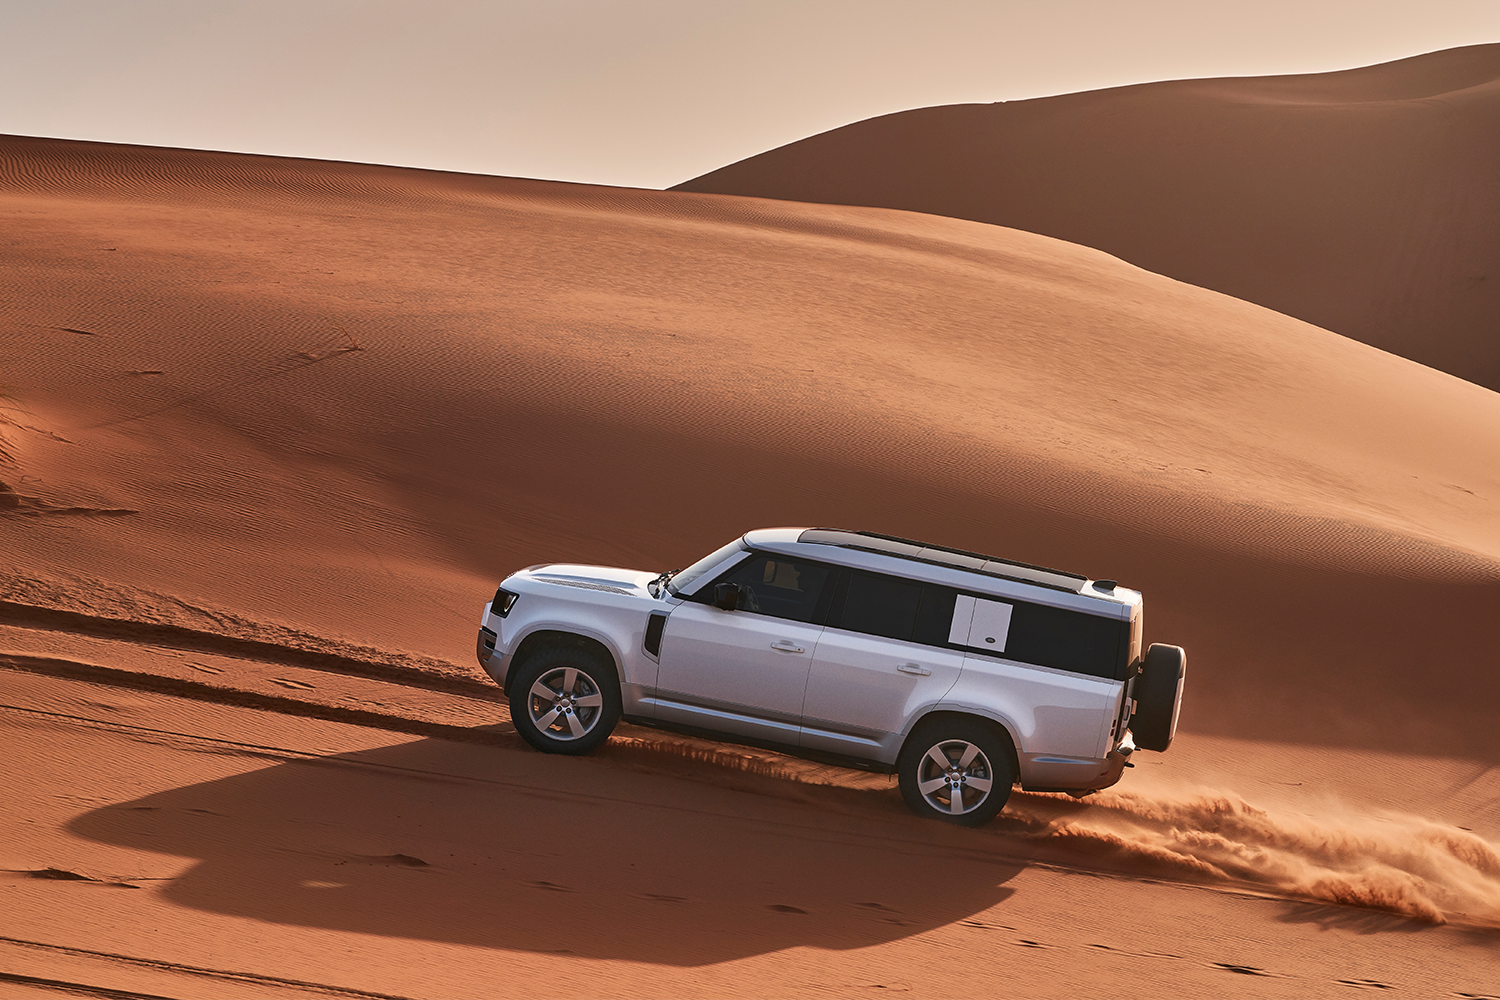 A Land Rover Defender 130 in white driving up sand dunes